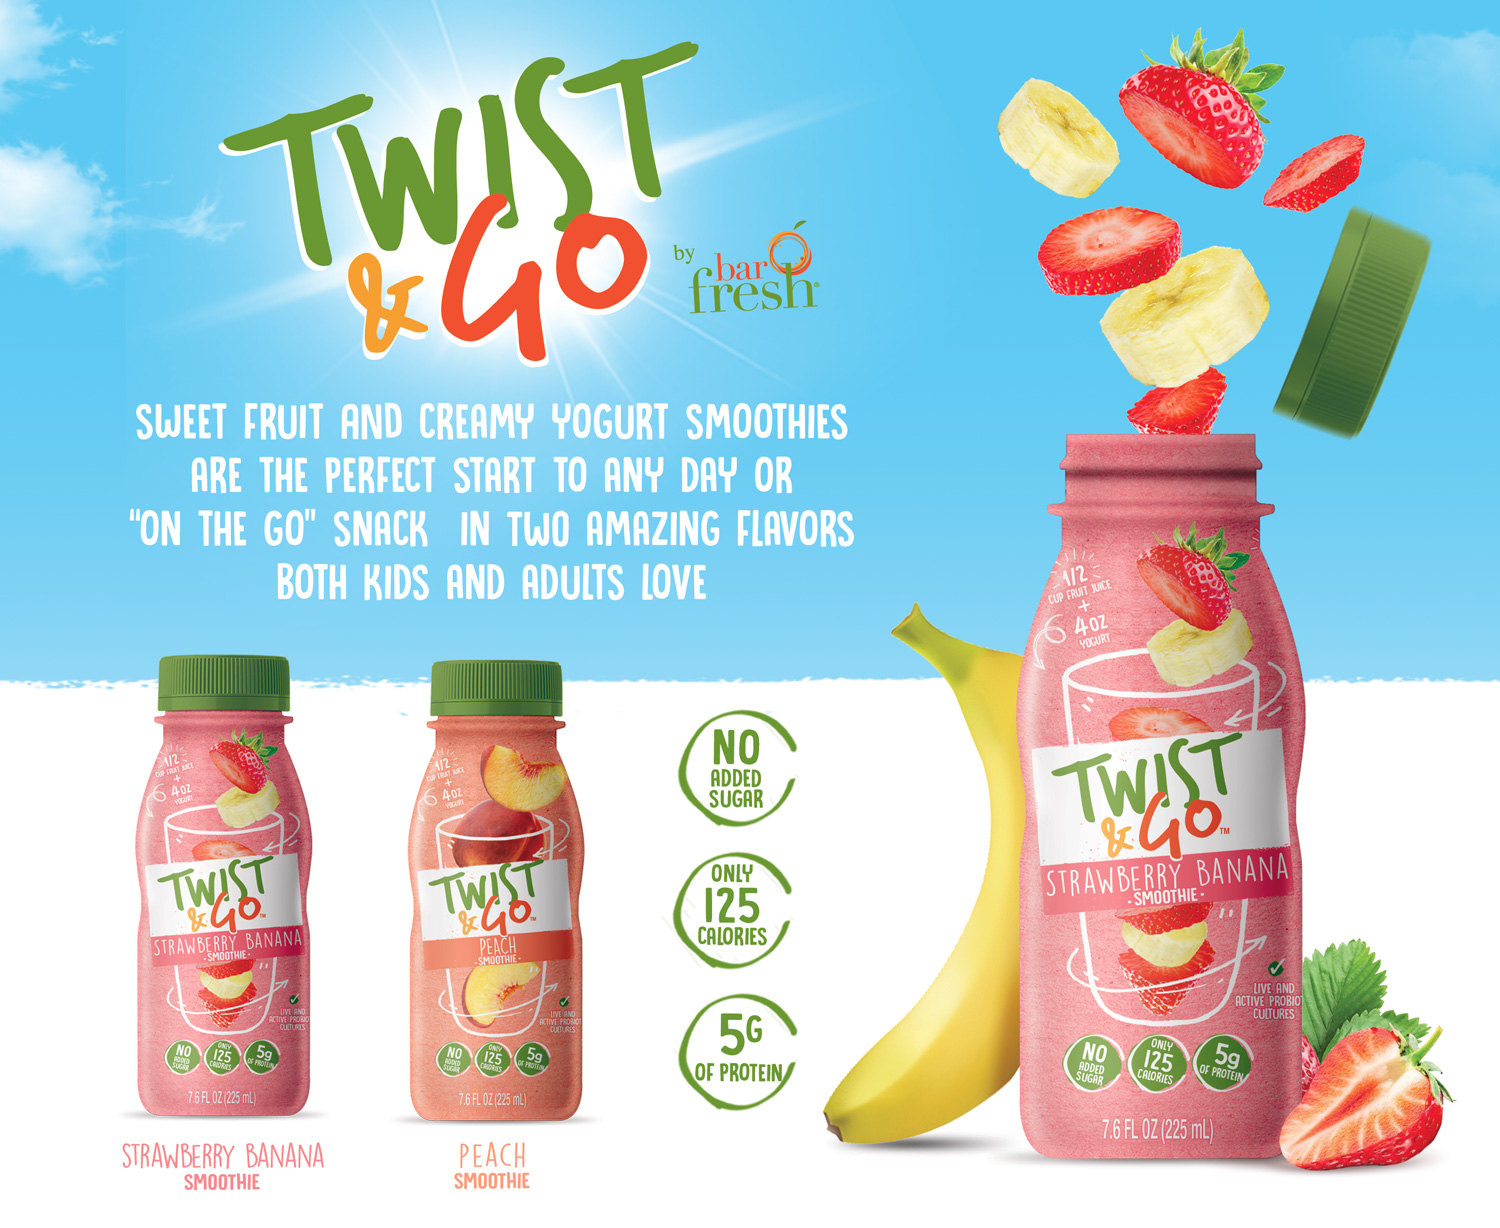 Barfresh Announces Rollout of “Twist & Go”™ Product to